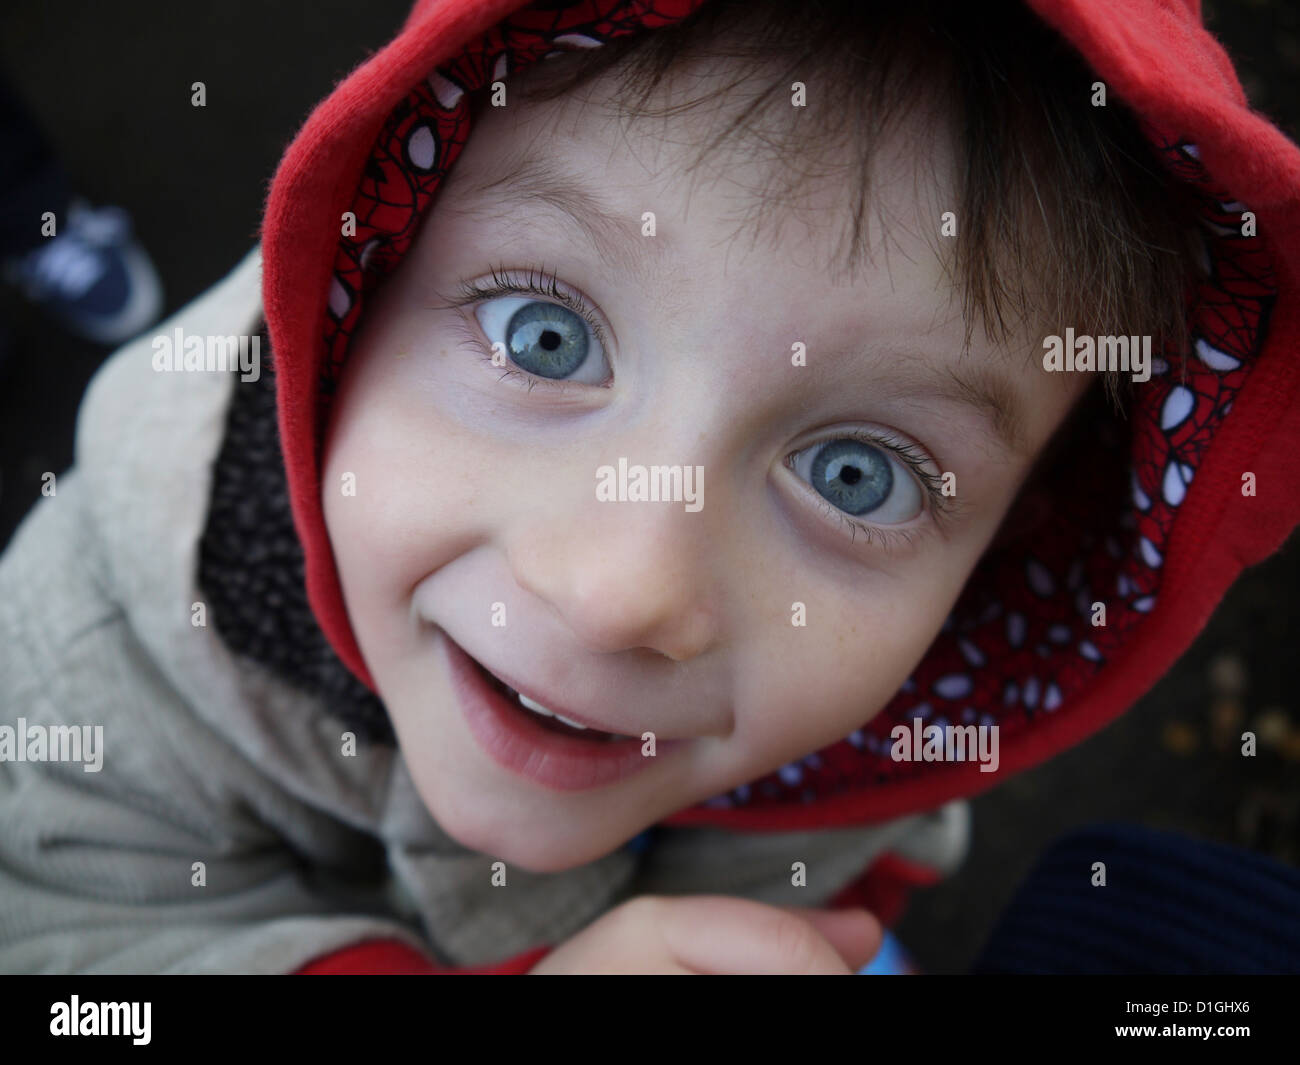 Small boy wearing a hooded jacket staring up at the camera with wide open eyes Stock Photo